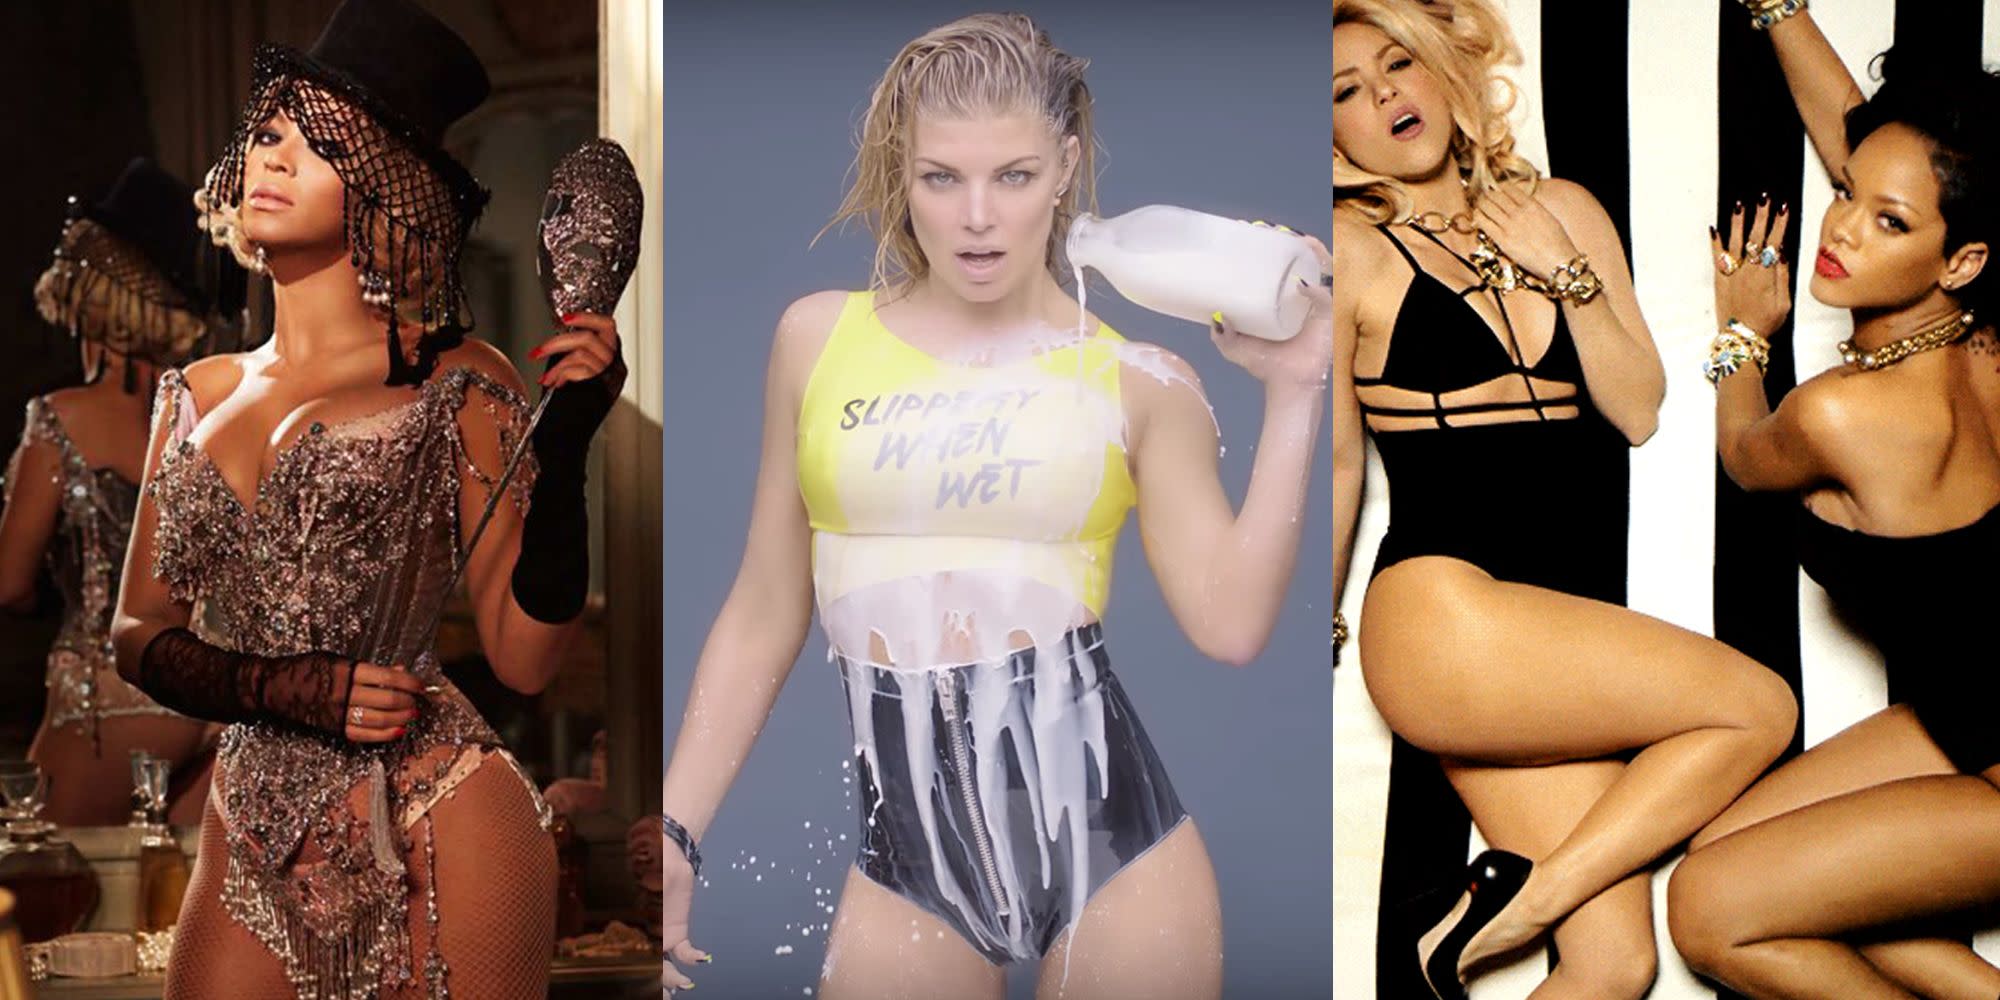 The Sexiest Music Videos Of All Time